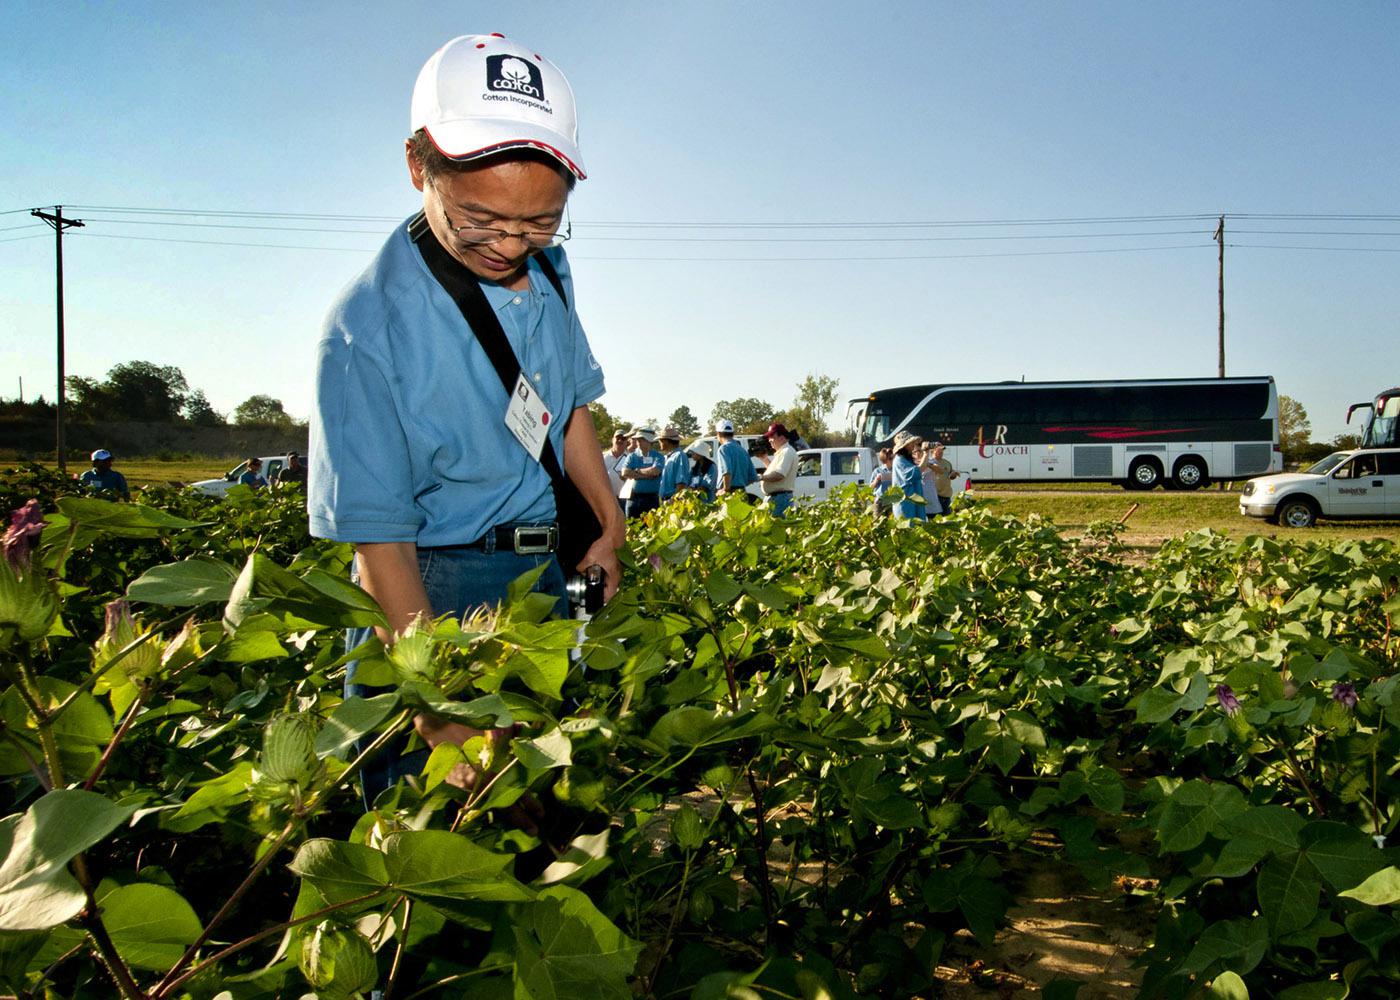 More than 100 cotton researchers and breeders from around the world were in Starkville Tuesday to learn about Mississippi State University's work with cotton. Yabing Li of the Cotton Research Institute in Anyang, China, examines cotton on MSU's R.R. Foil Plant Science Research Center. (Photo by Scott Corey)